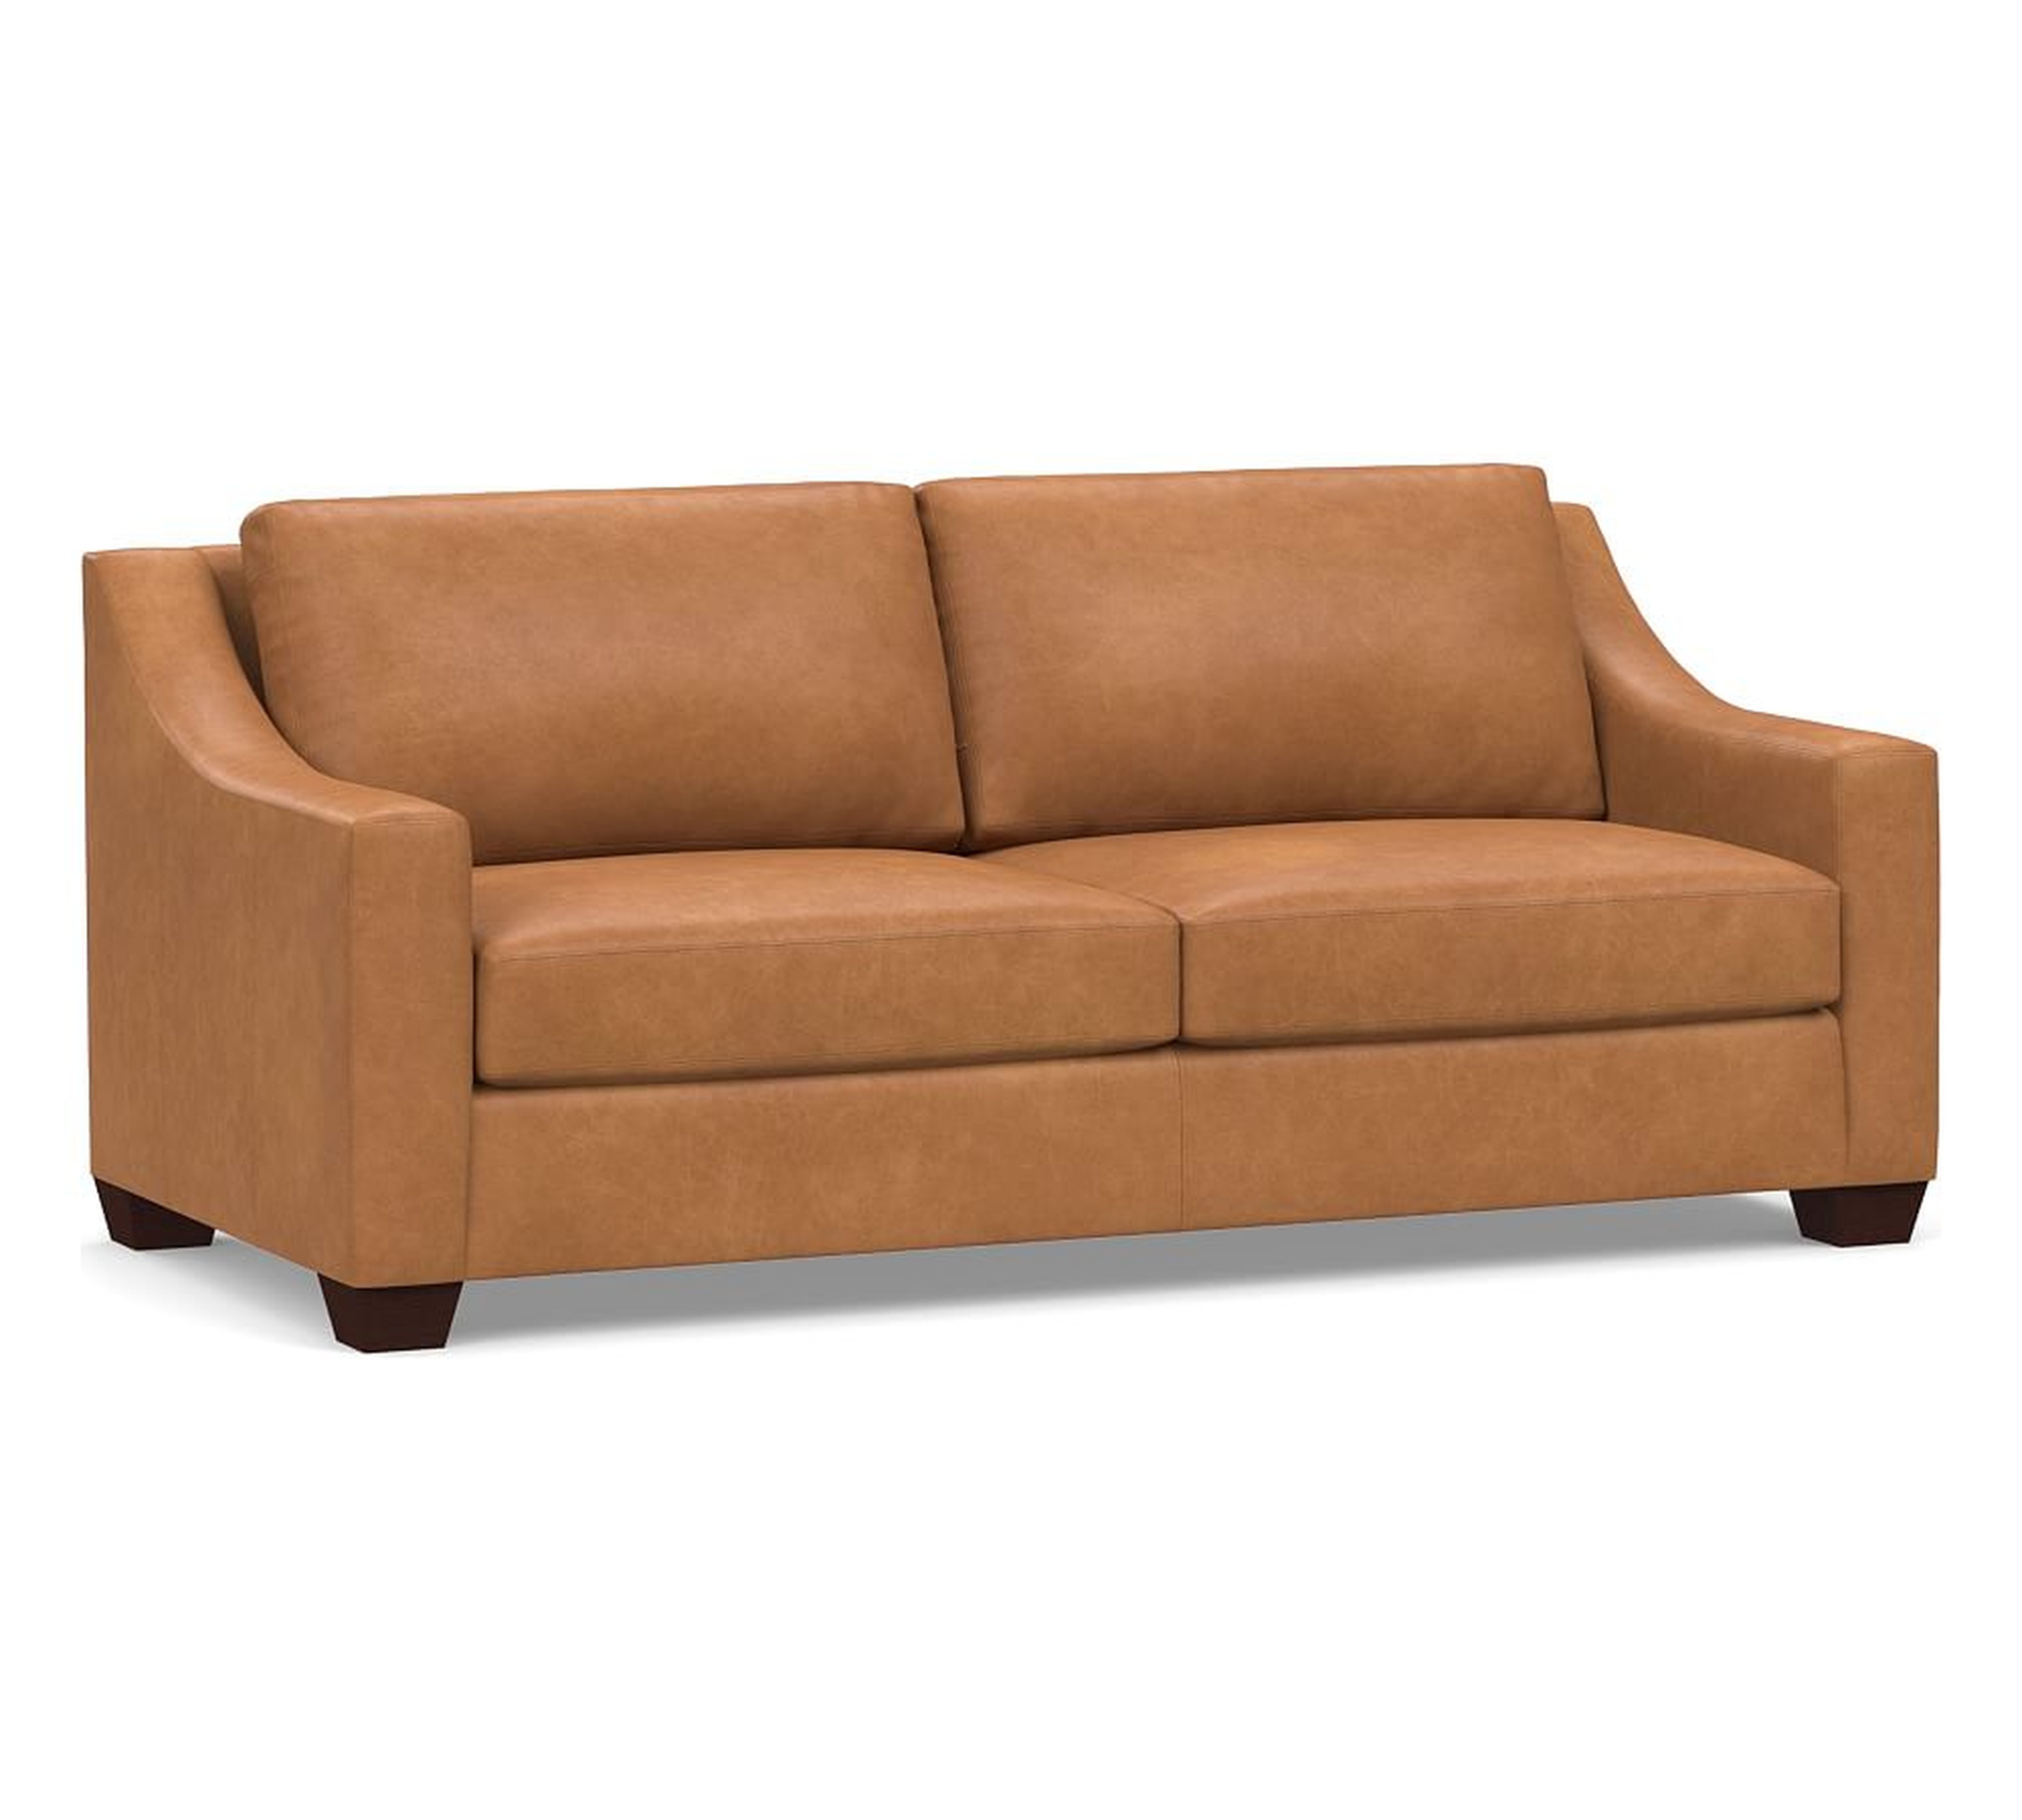 York Slope Arm Leather Sofa 80", Polyester Wrapped Cushions, Churchfield Camel - Pottery Barn